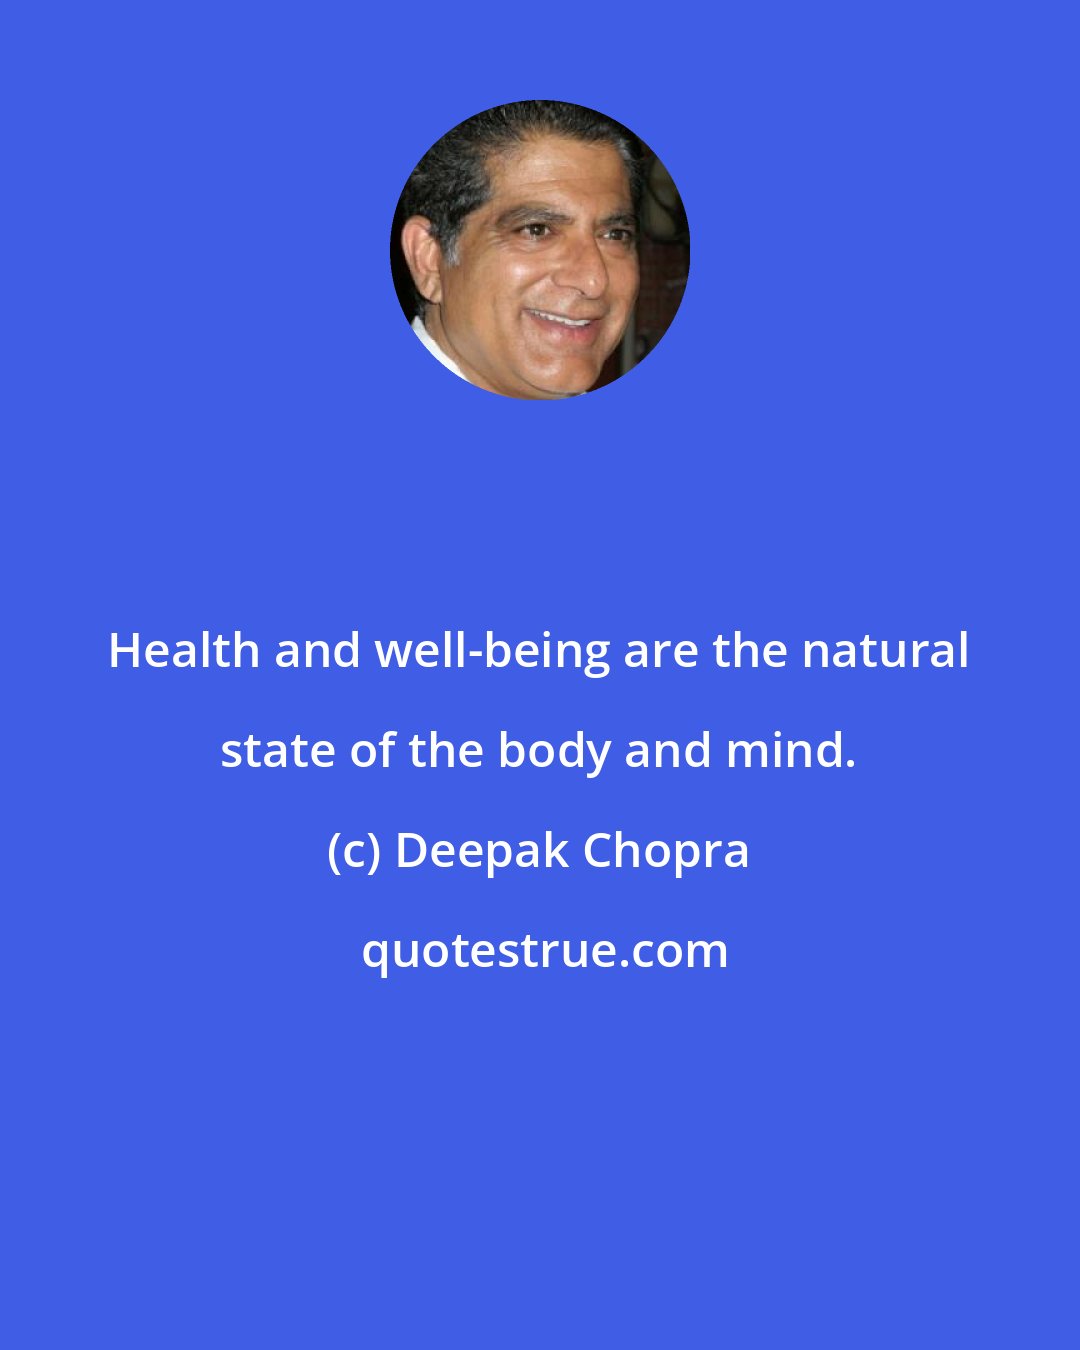 Deepak Chopra: Health and well-being are the natural state of the body and mind.